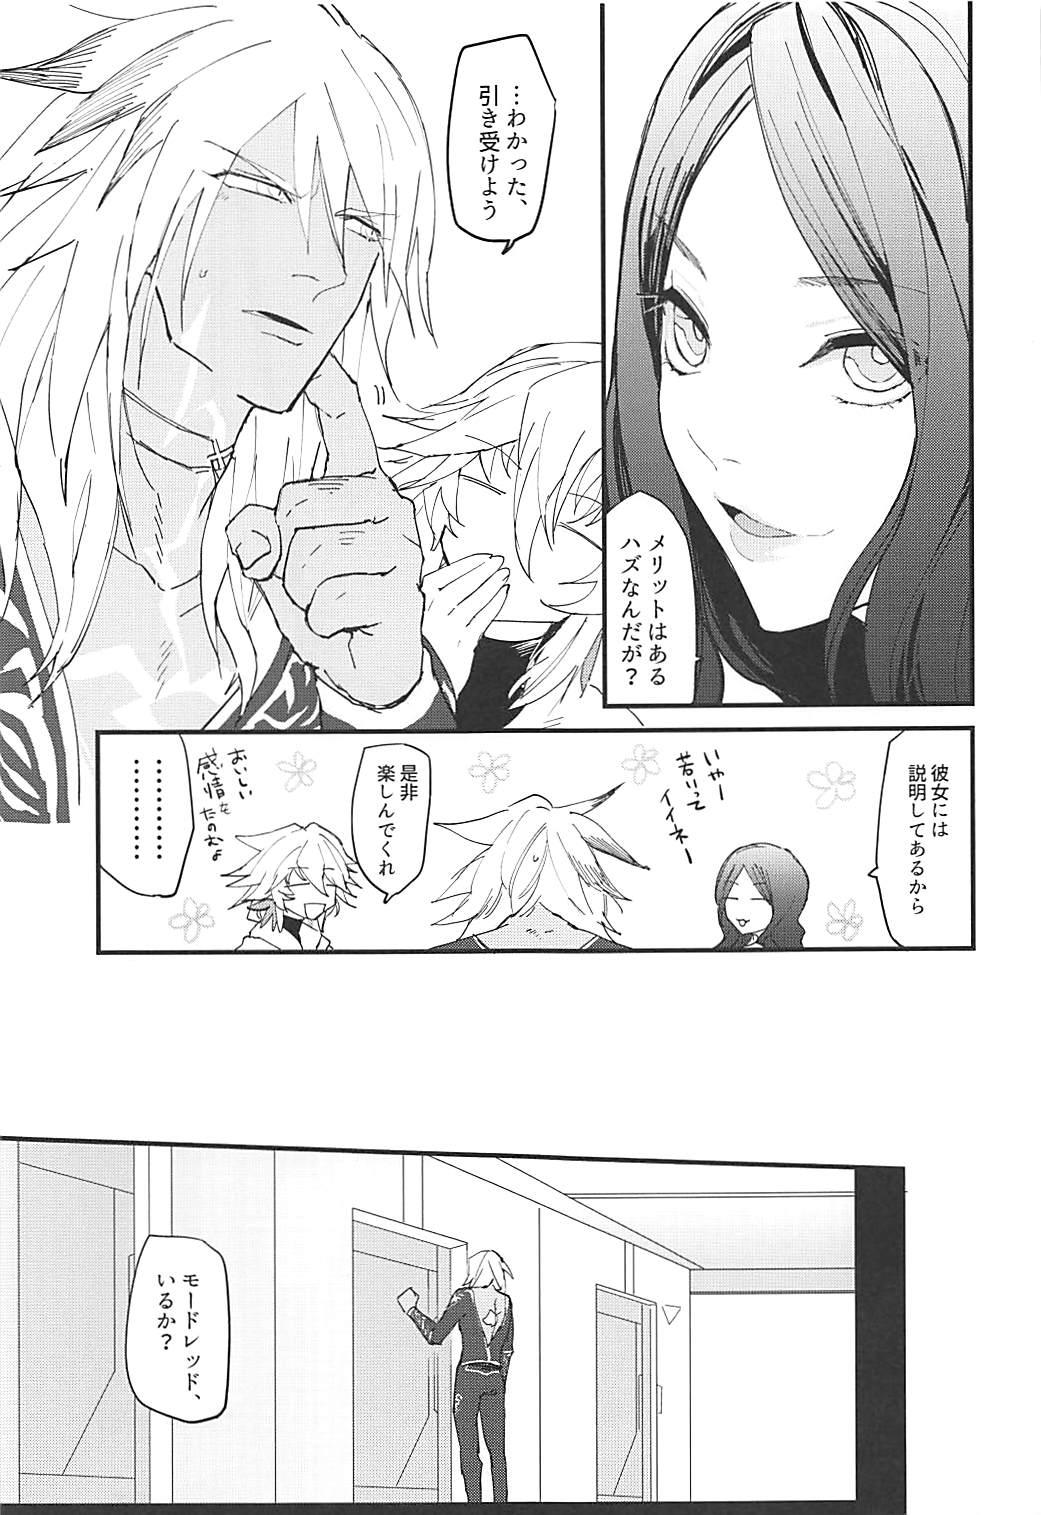 Dildos THE WARRIORS' REST - Fate grand order Dick Sucking - Page 5